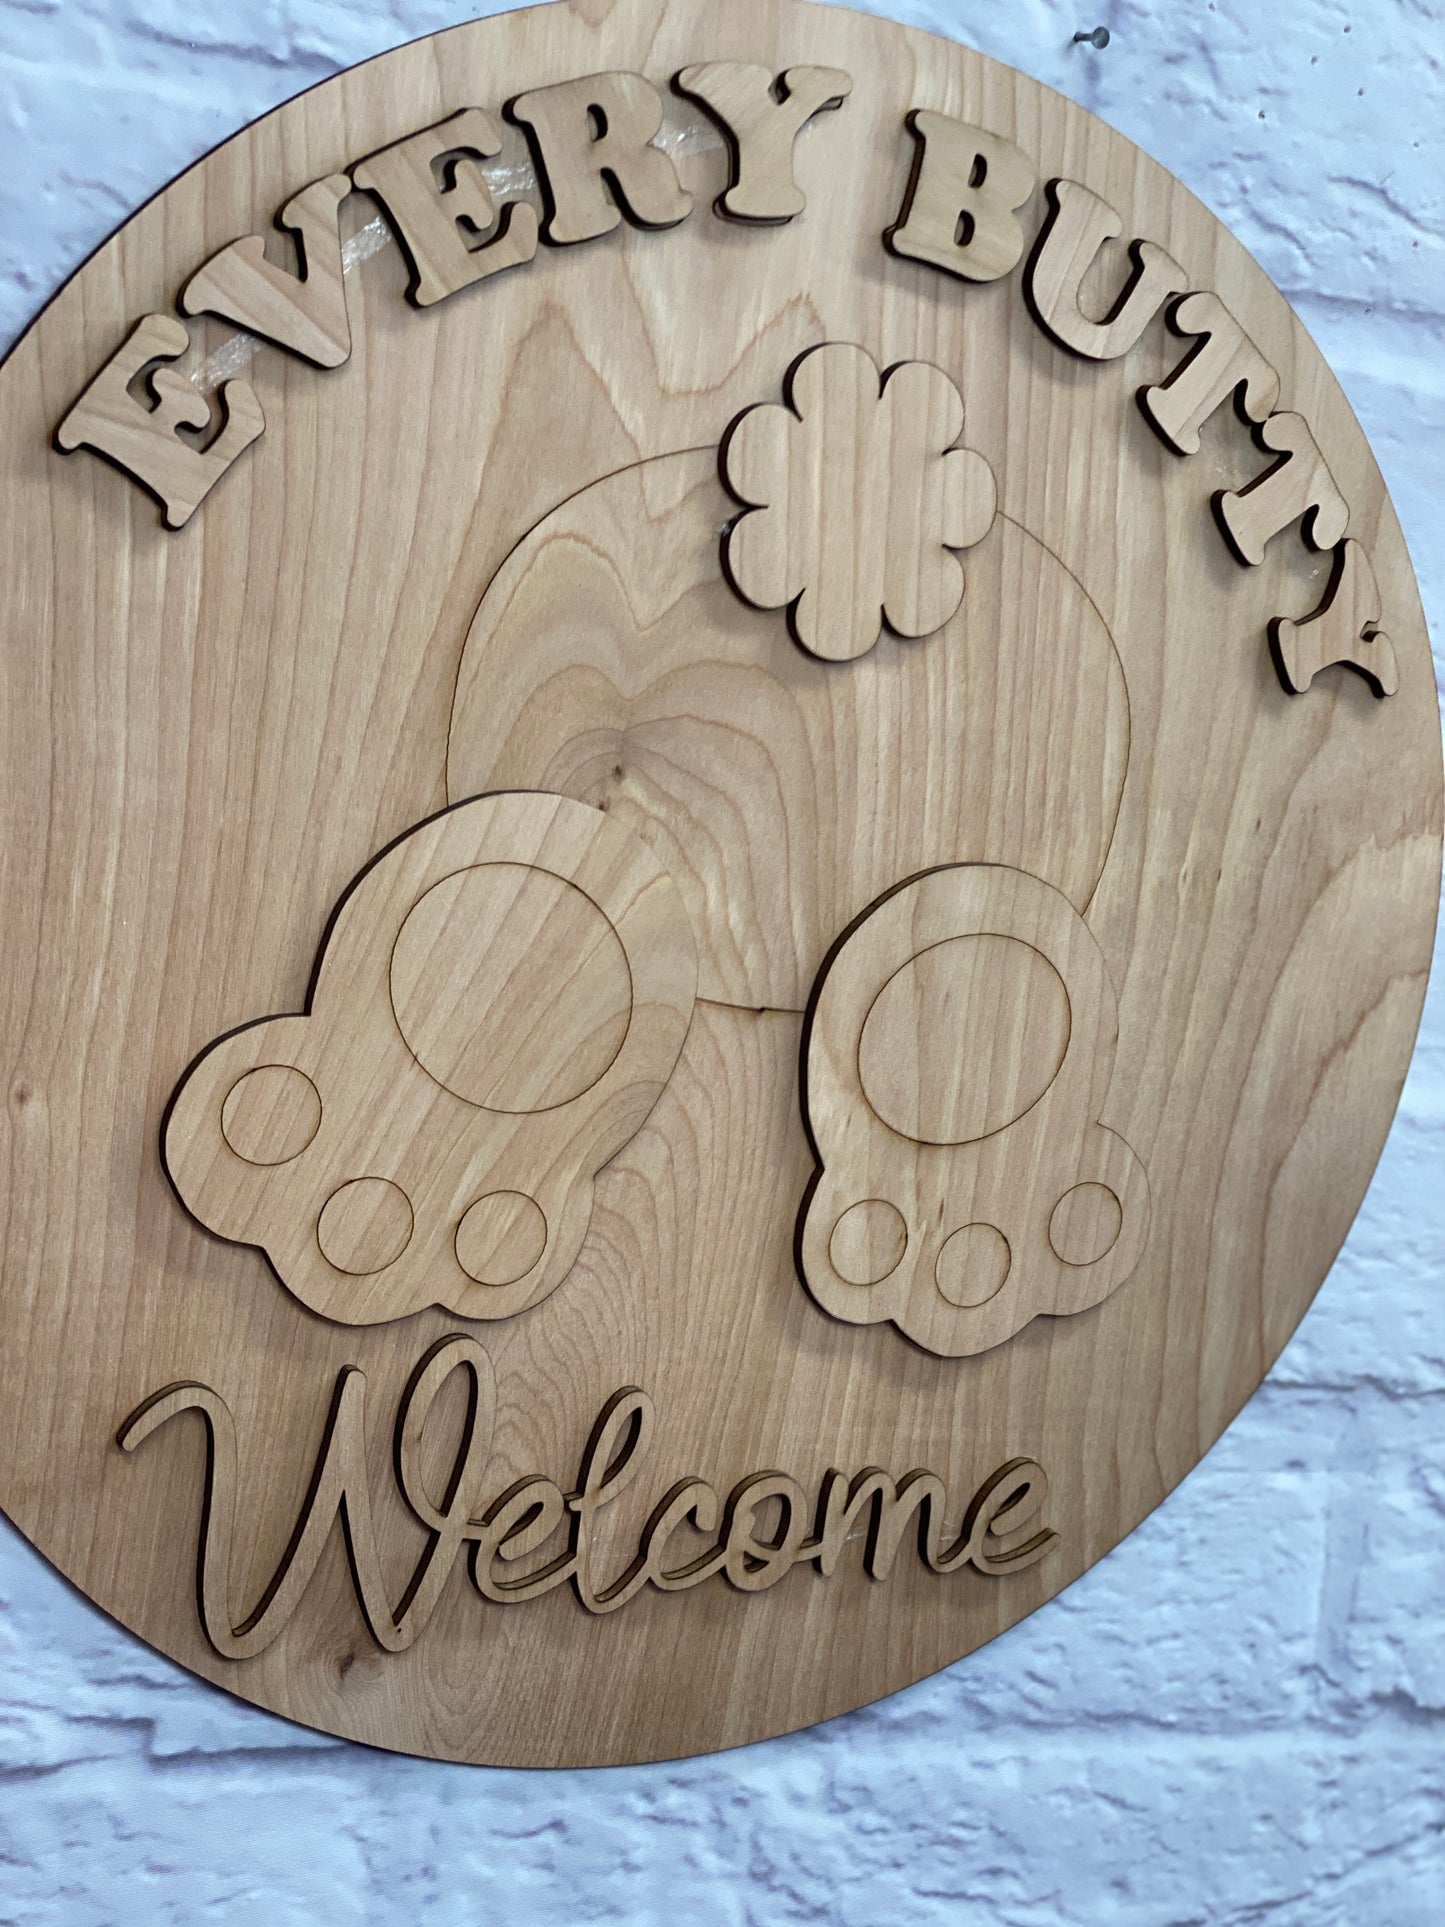 Every Butty Welcome Bunny Bottom Door Hanger Laser Cut Blank for DIY Project